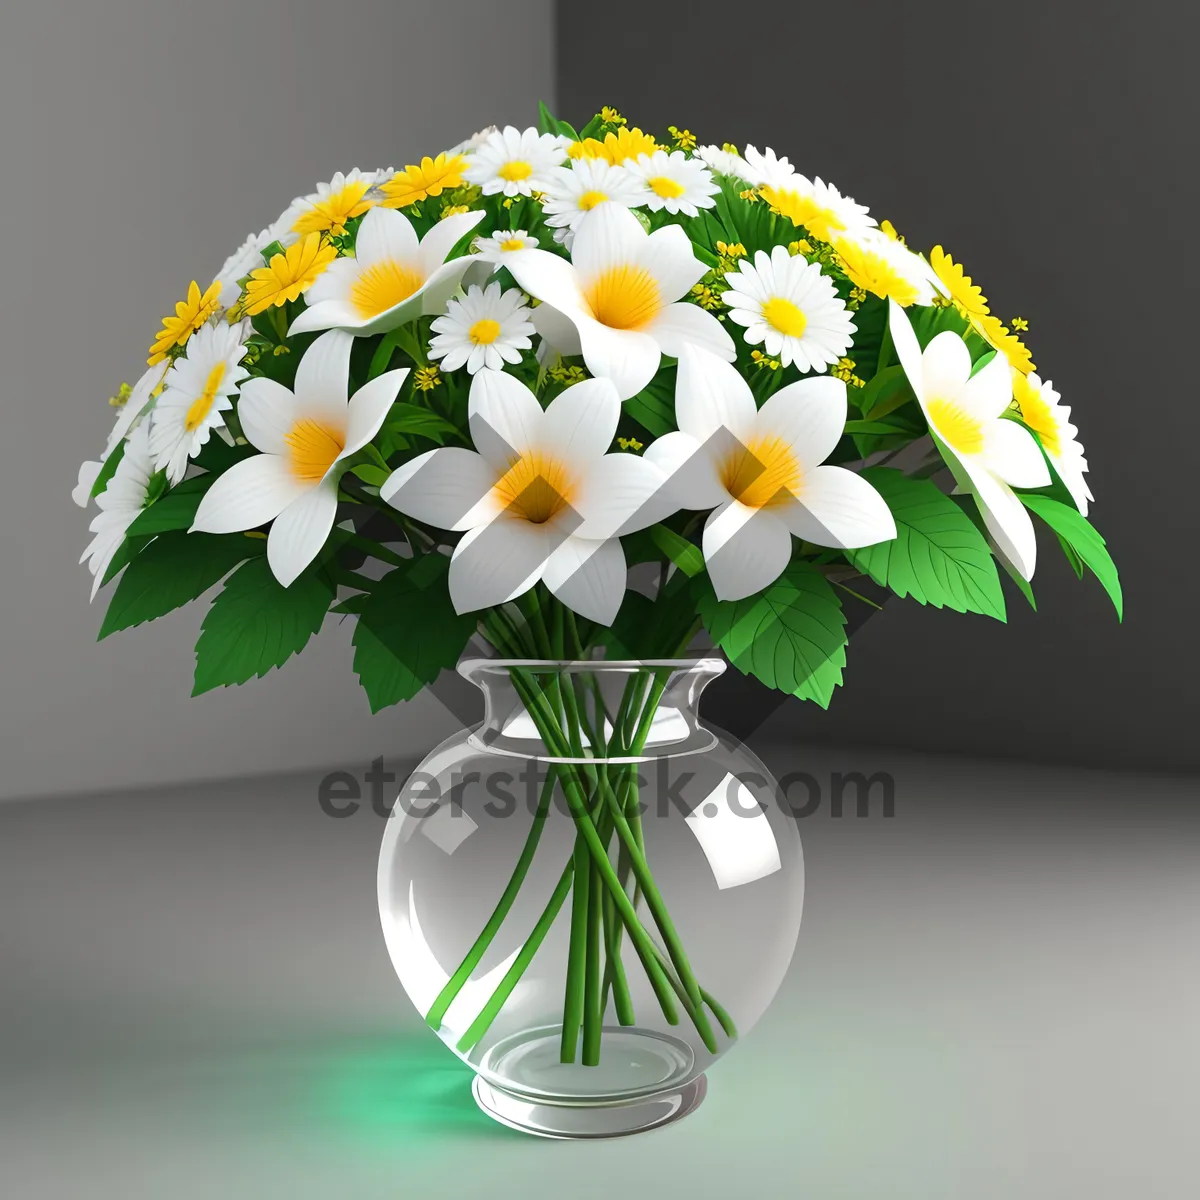 Picture of Yellow Daisy Bouquet in a Vase